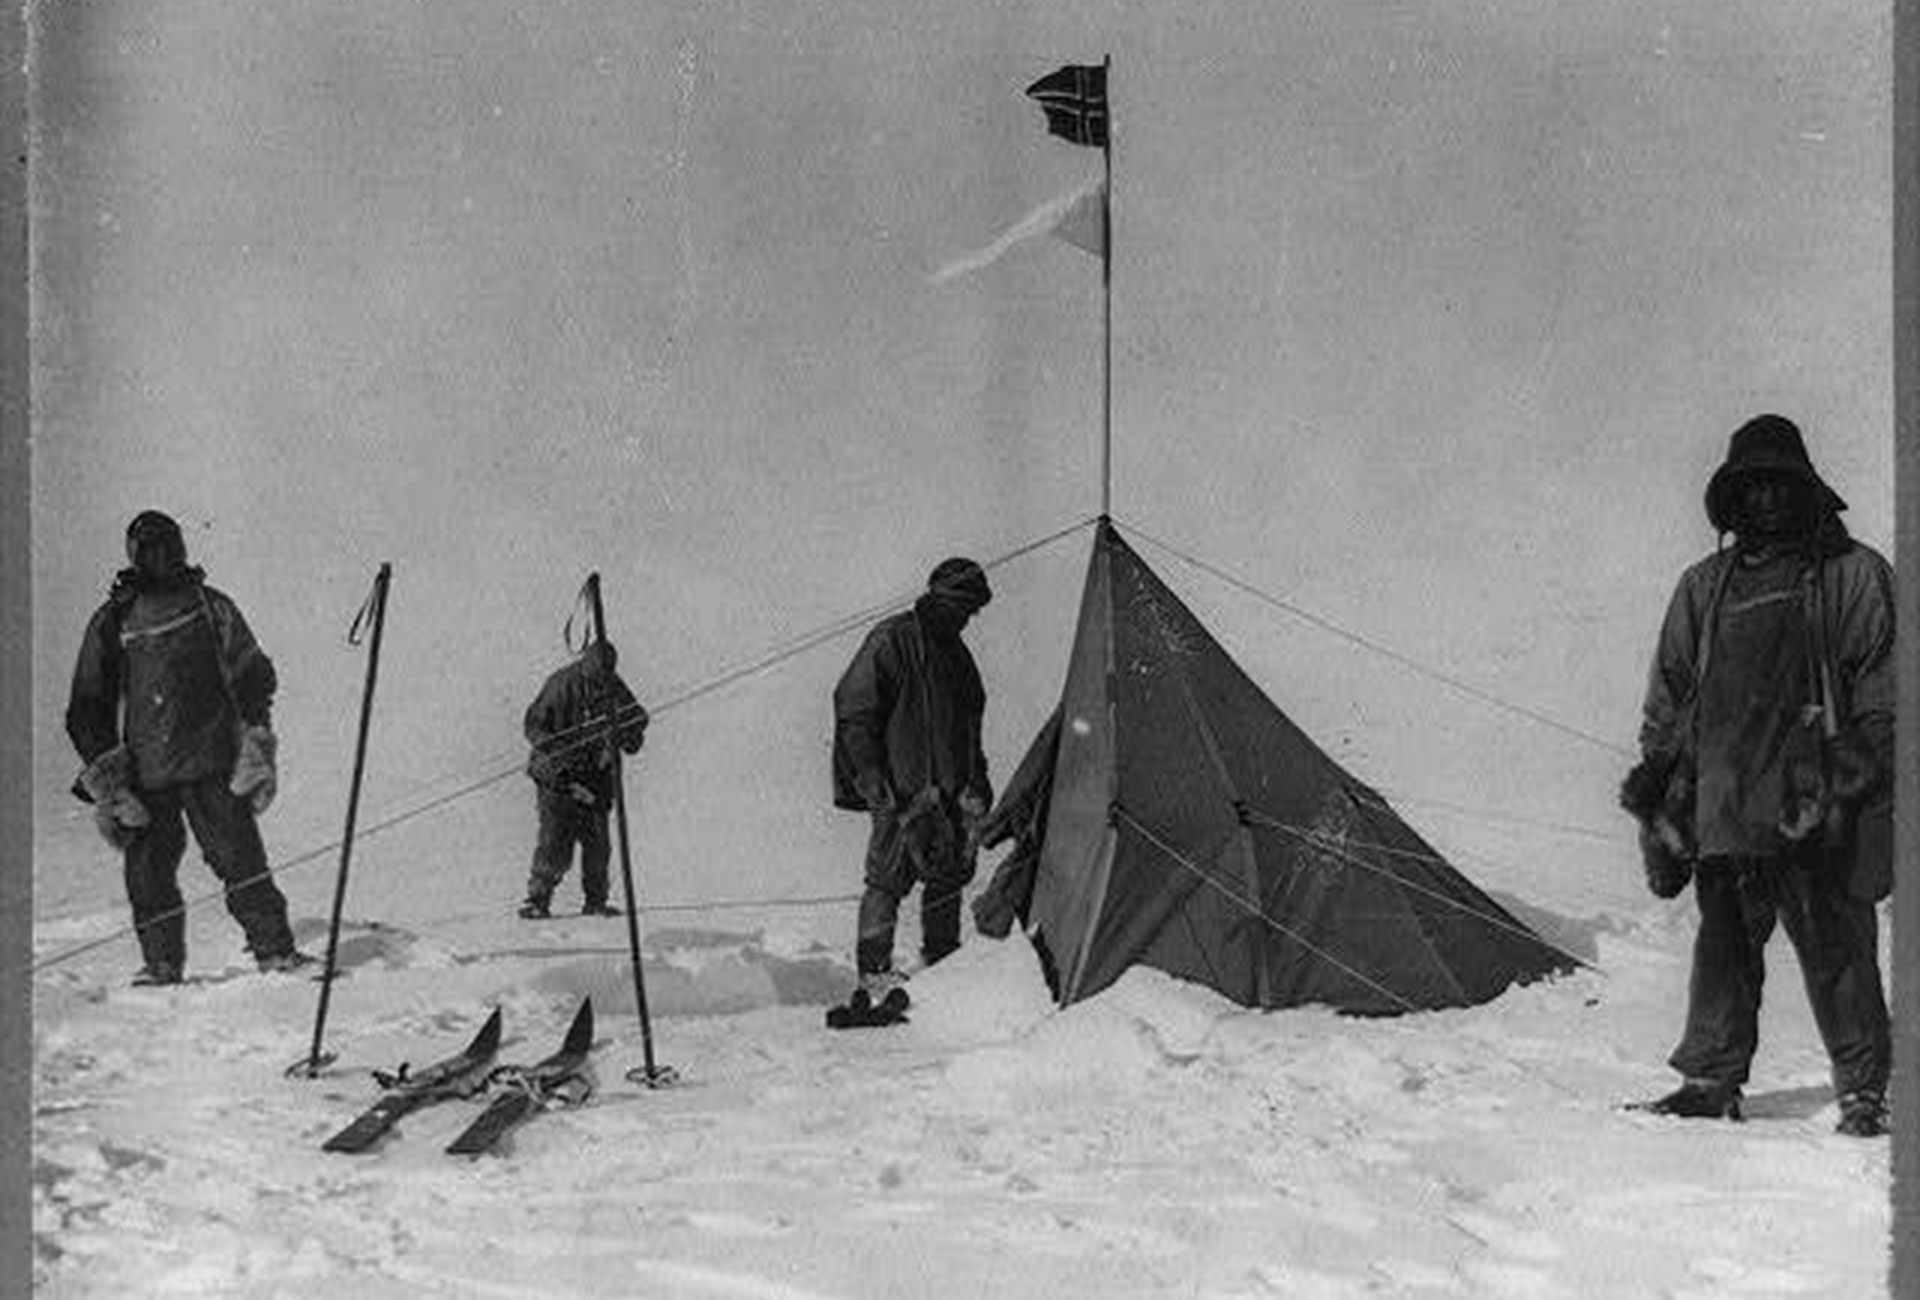 Members of the Terra Nova expedition at the South Pole